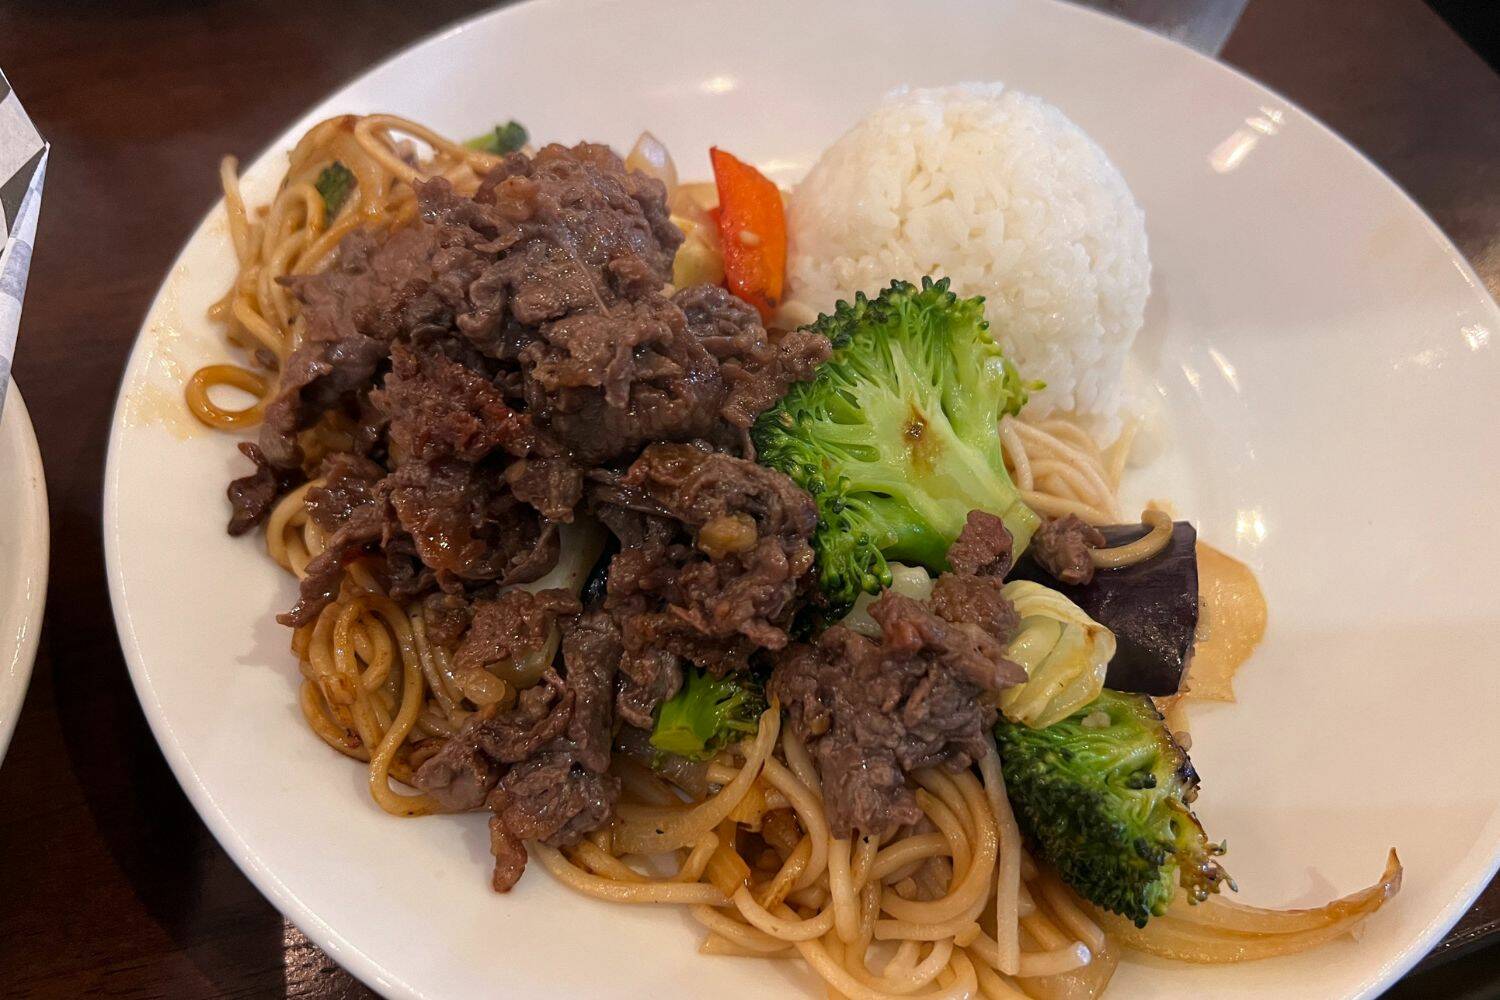 Bulgogi lunch plate special with stir-fried udon noodles and vegetables.